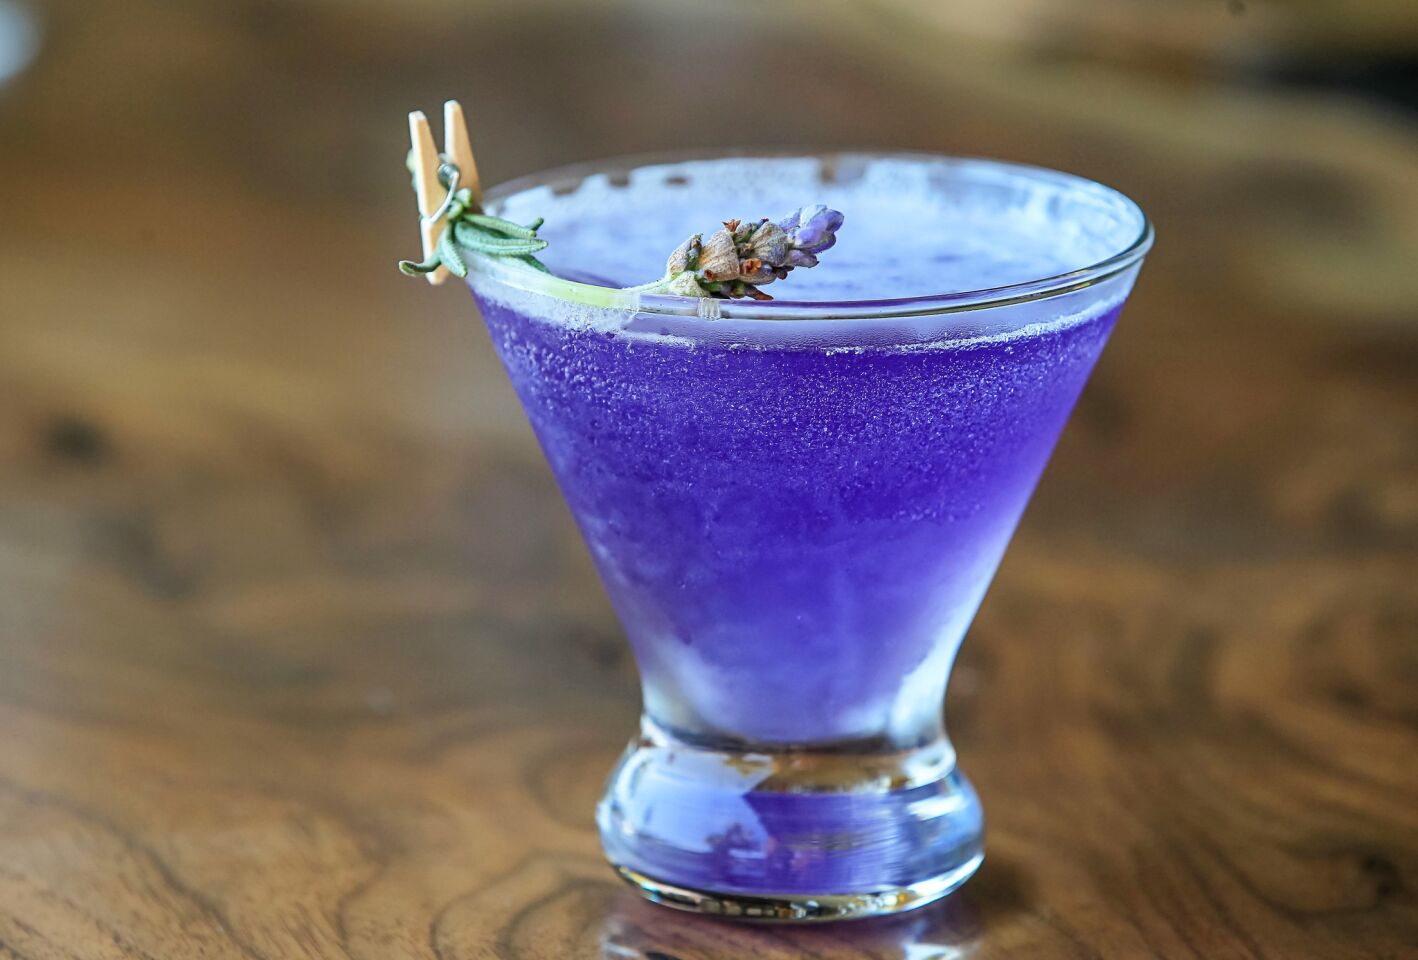 This is the Empress 75 drink: Empress gin, St. Germain, lavender syrup, fresh lemon, topped with sparkling wine.